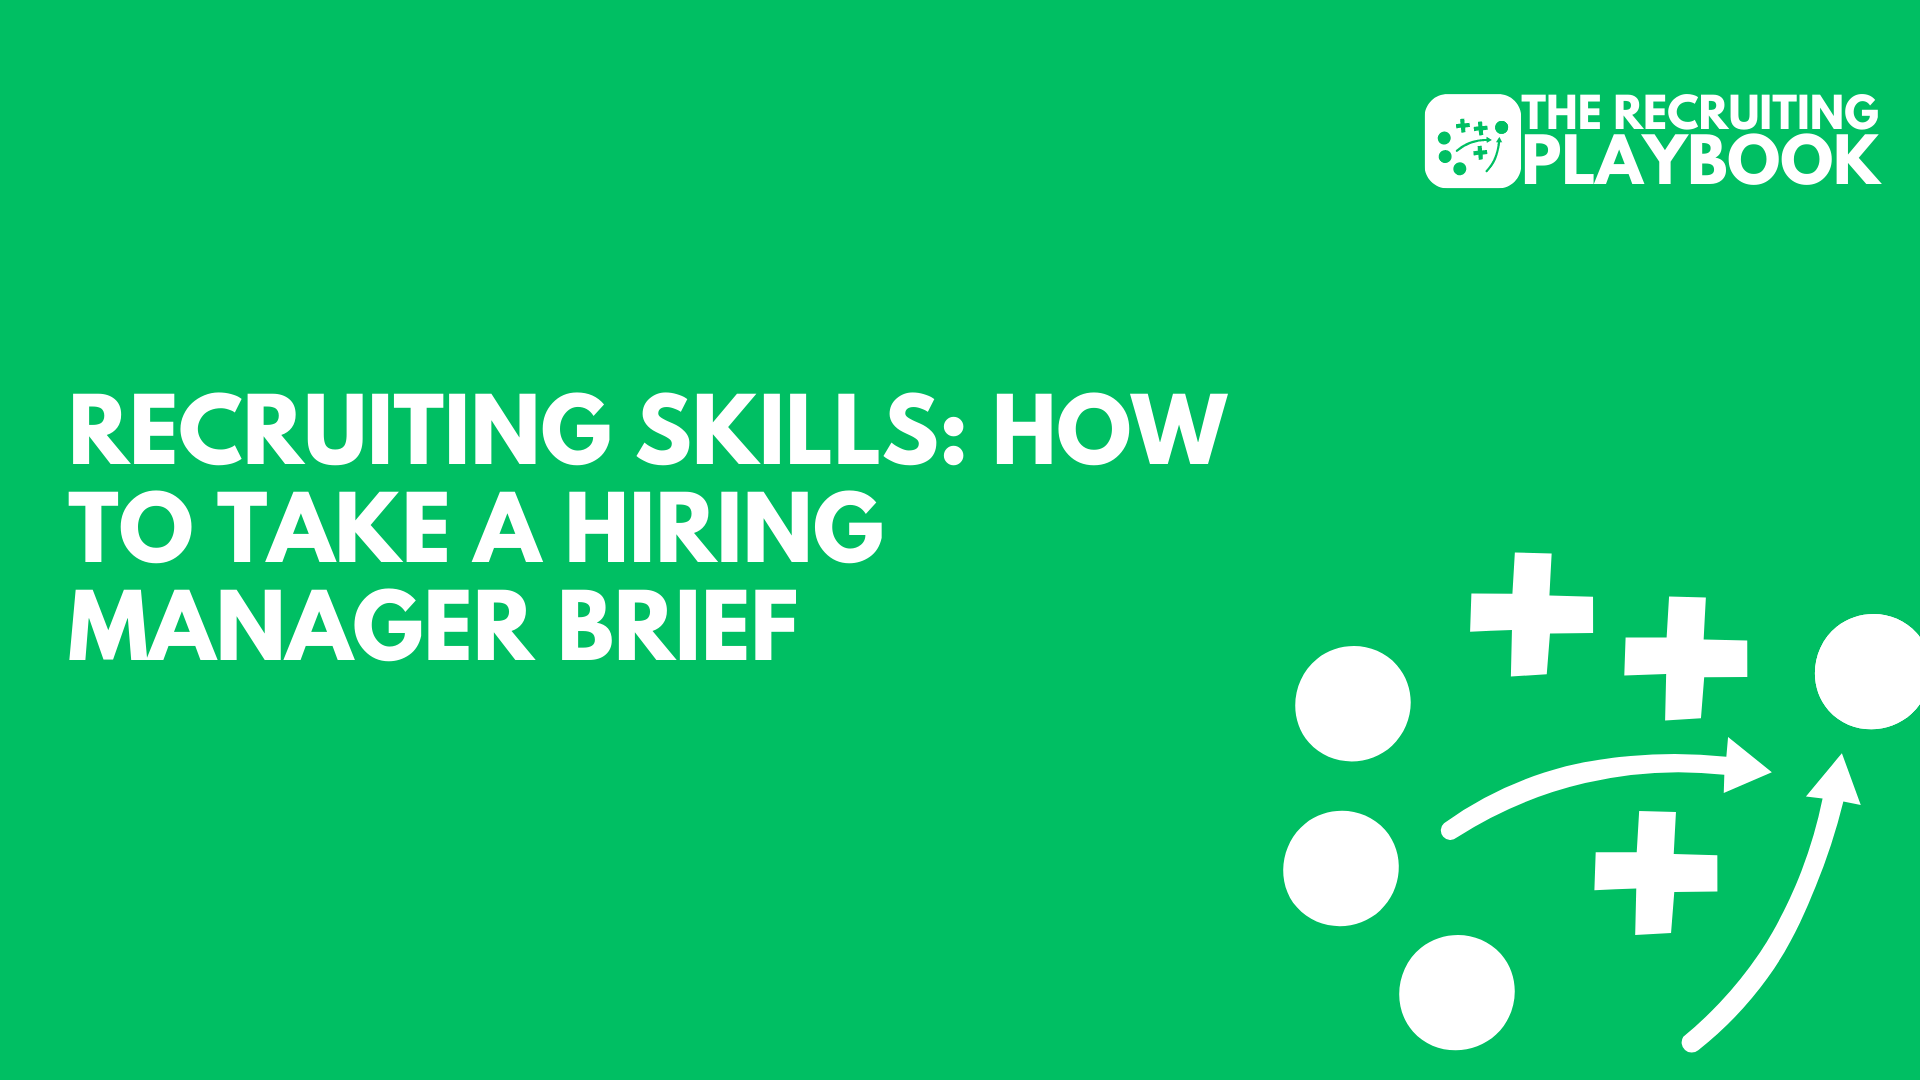 Video: How to Take a Hiring Manager Brief